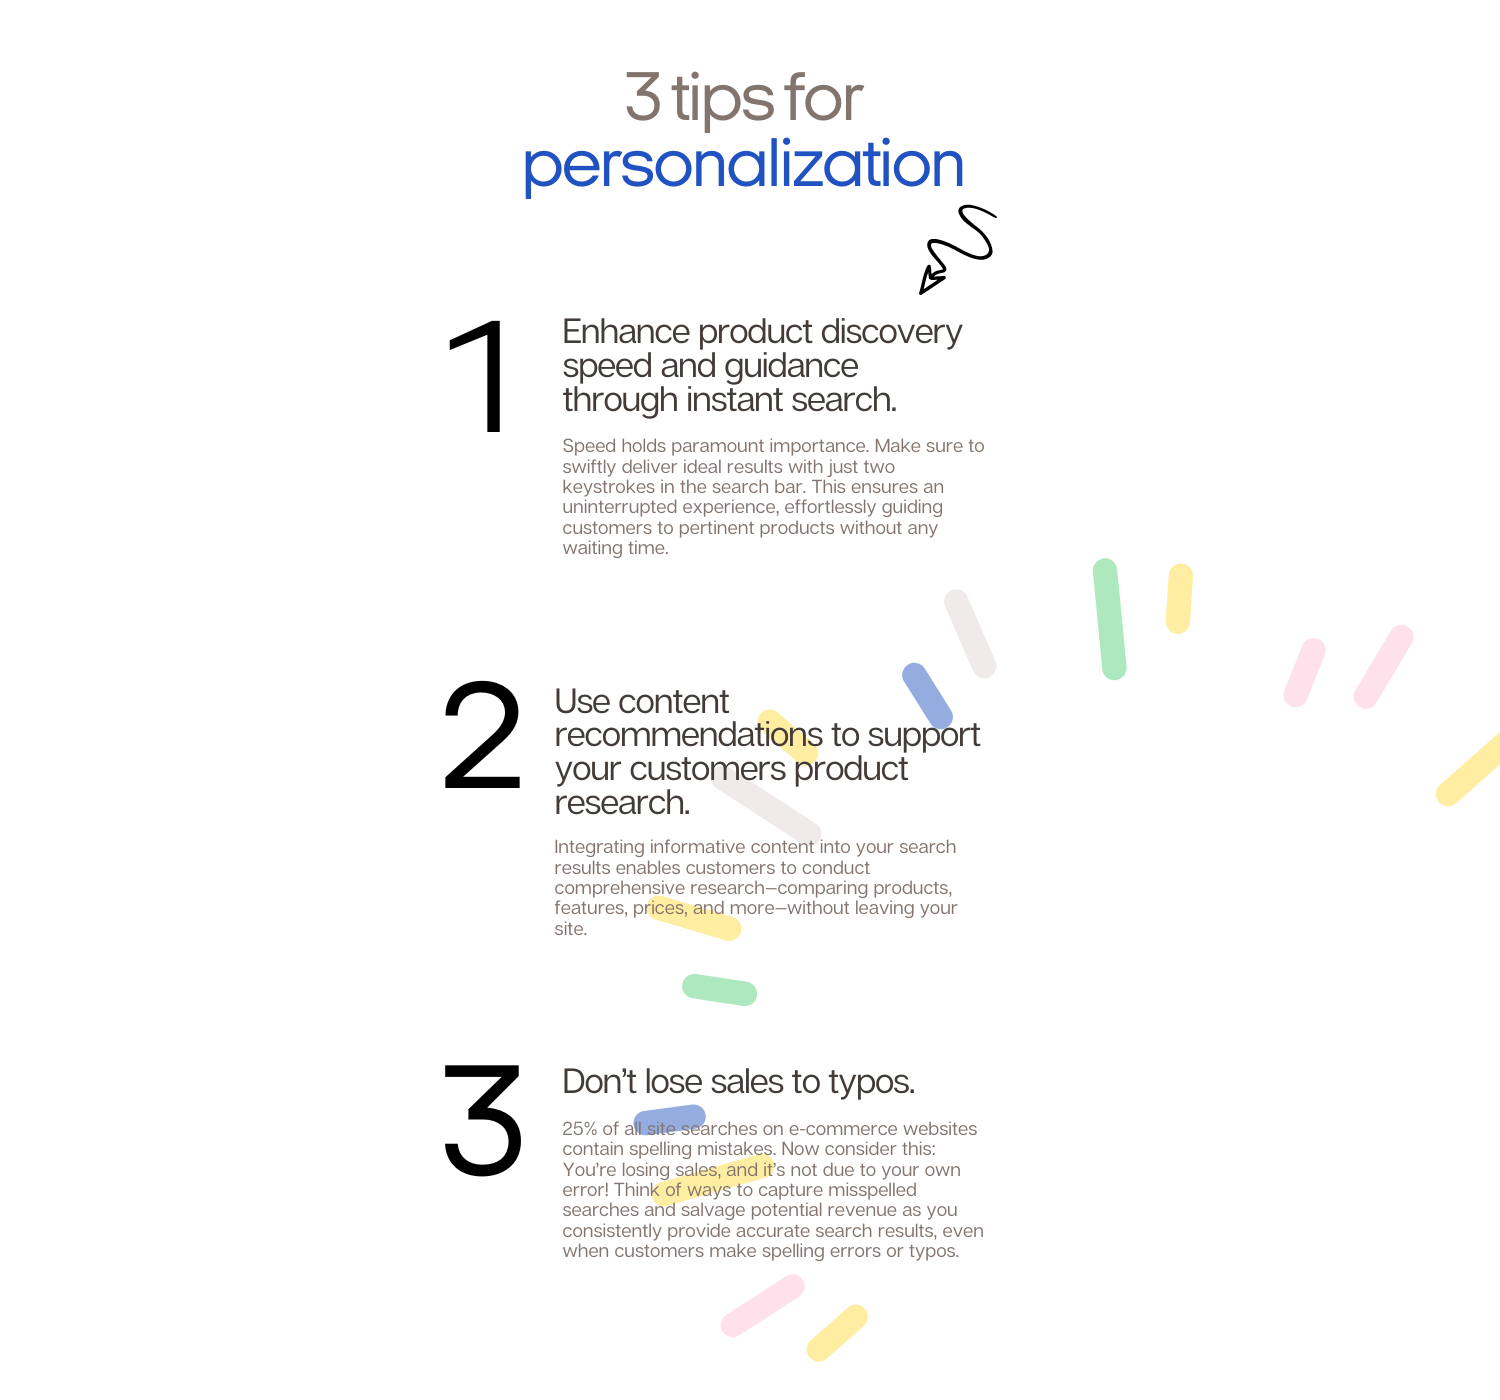 3 tips for personalization (900 x 700 px)-1